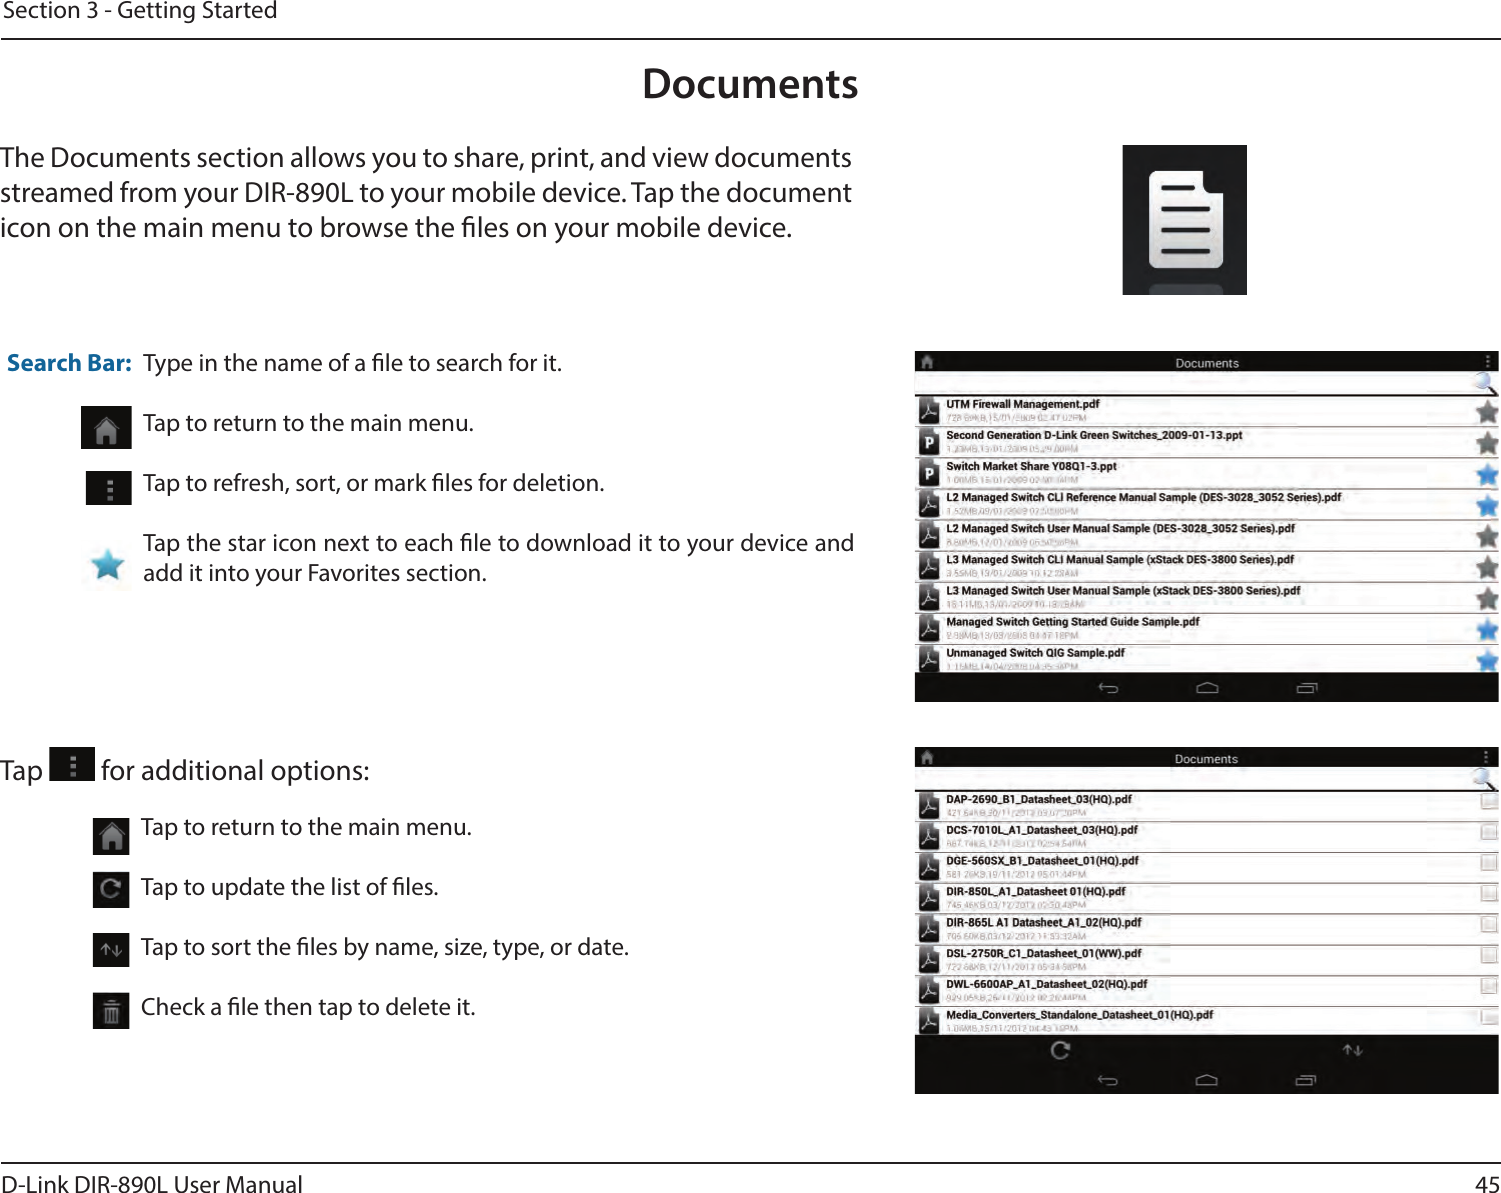 45D-Link DIR-890L User ManualSection 3 - Getting StartedDocumentsThe Documents section allows you to share, print, and view documents streamed from your DIR-890L to your mobile device. Tap the document icon on the main menu to browse the les on your mobile device.Type in the name of a le to search for it.Tap to return to the main menu.Tap to refresh, sort, or mark les for deletion.Tap the star icon next to each le to download it to your device and add it into your Favorites section.Search Bar:Tap   for additional options:Tap to return to the main menu.Tap to update the list of les.Tap to sort the les by name, size, type, or date.Check a le then tap to delete it.